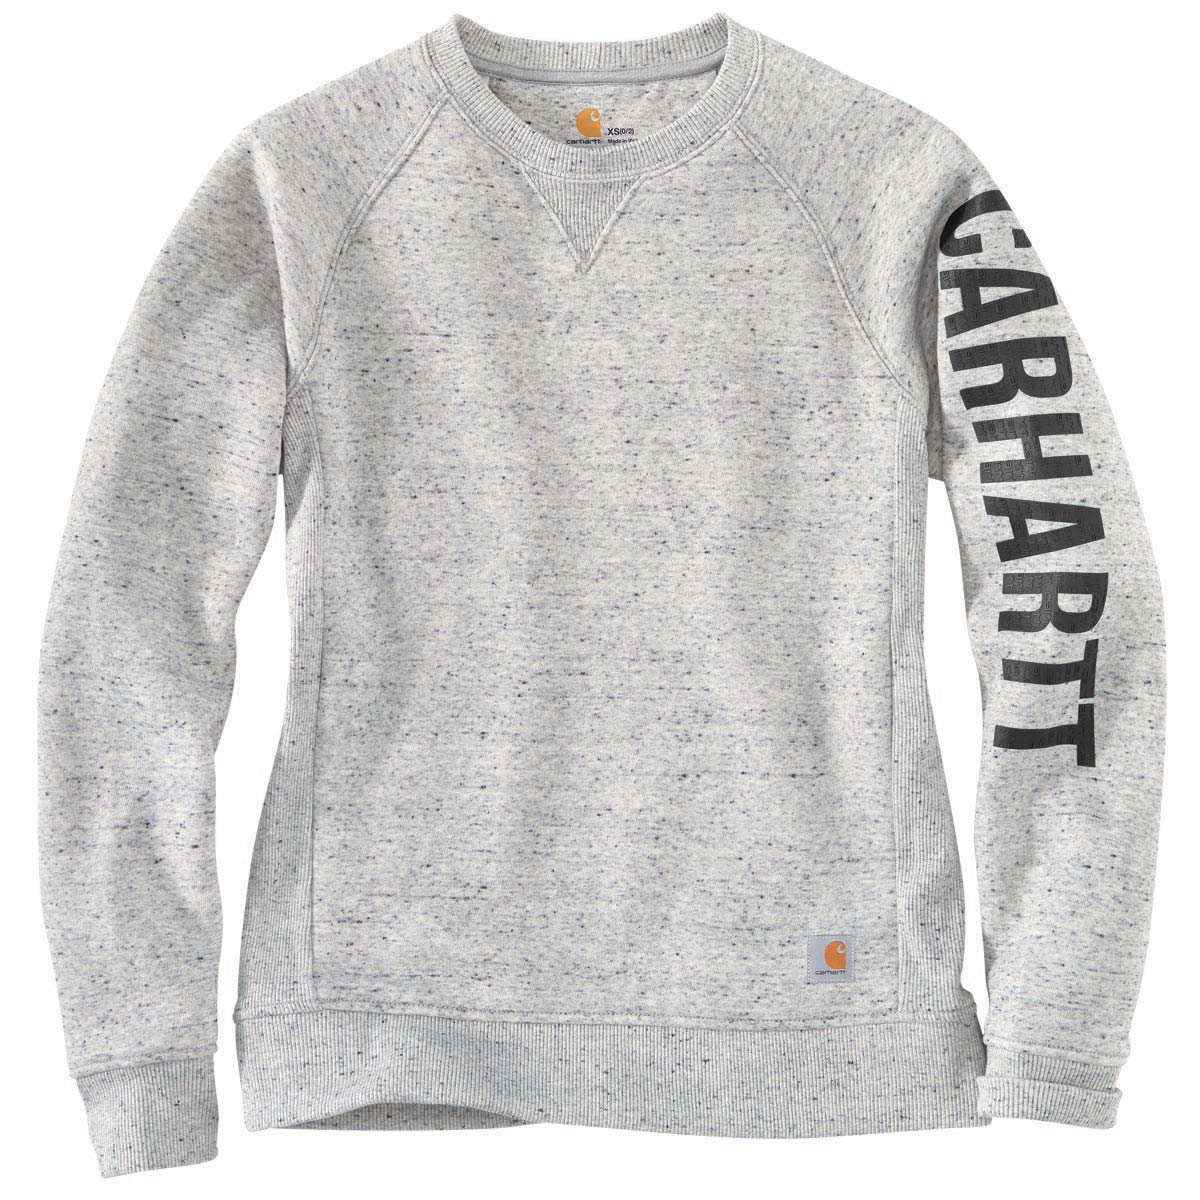 Carhartt Womens Relaxed Fit Midweight Logo Graphic Sweatshirt